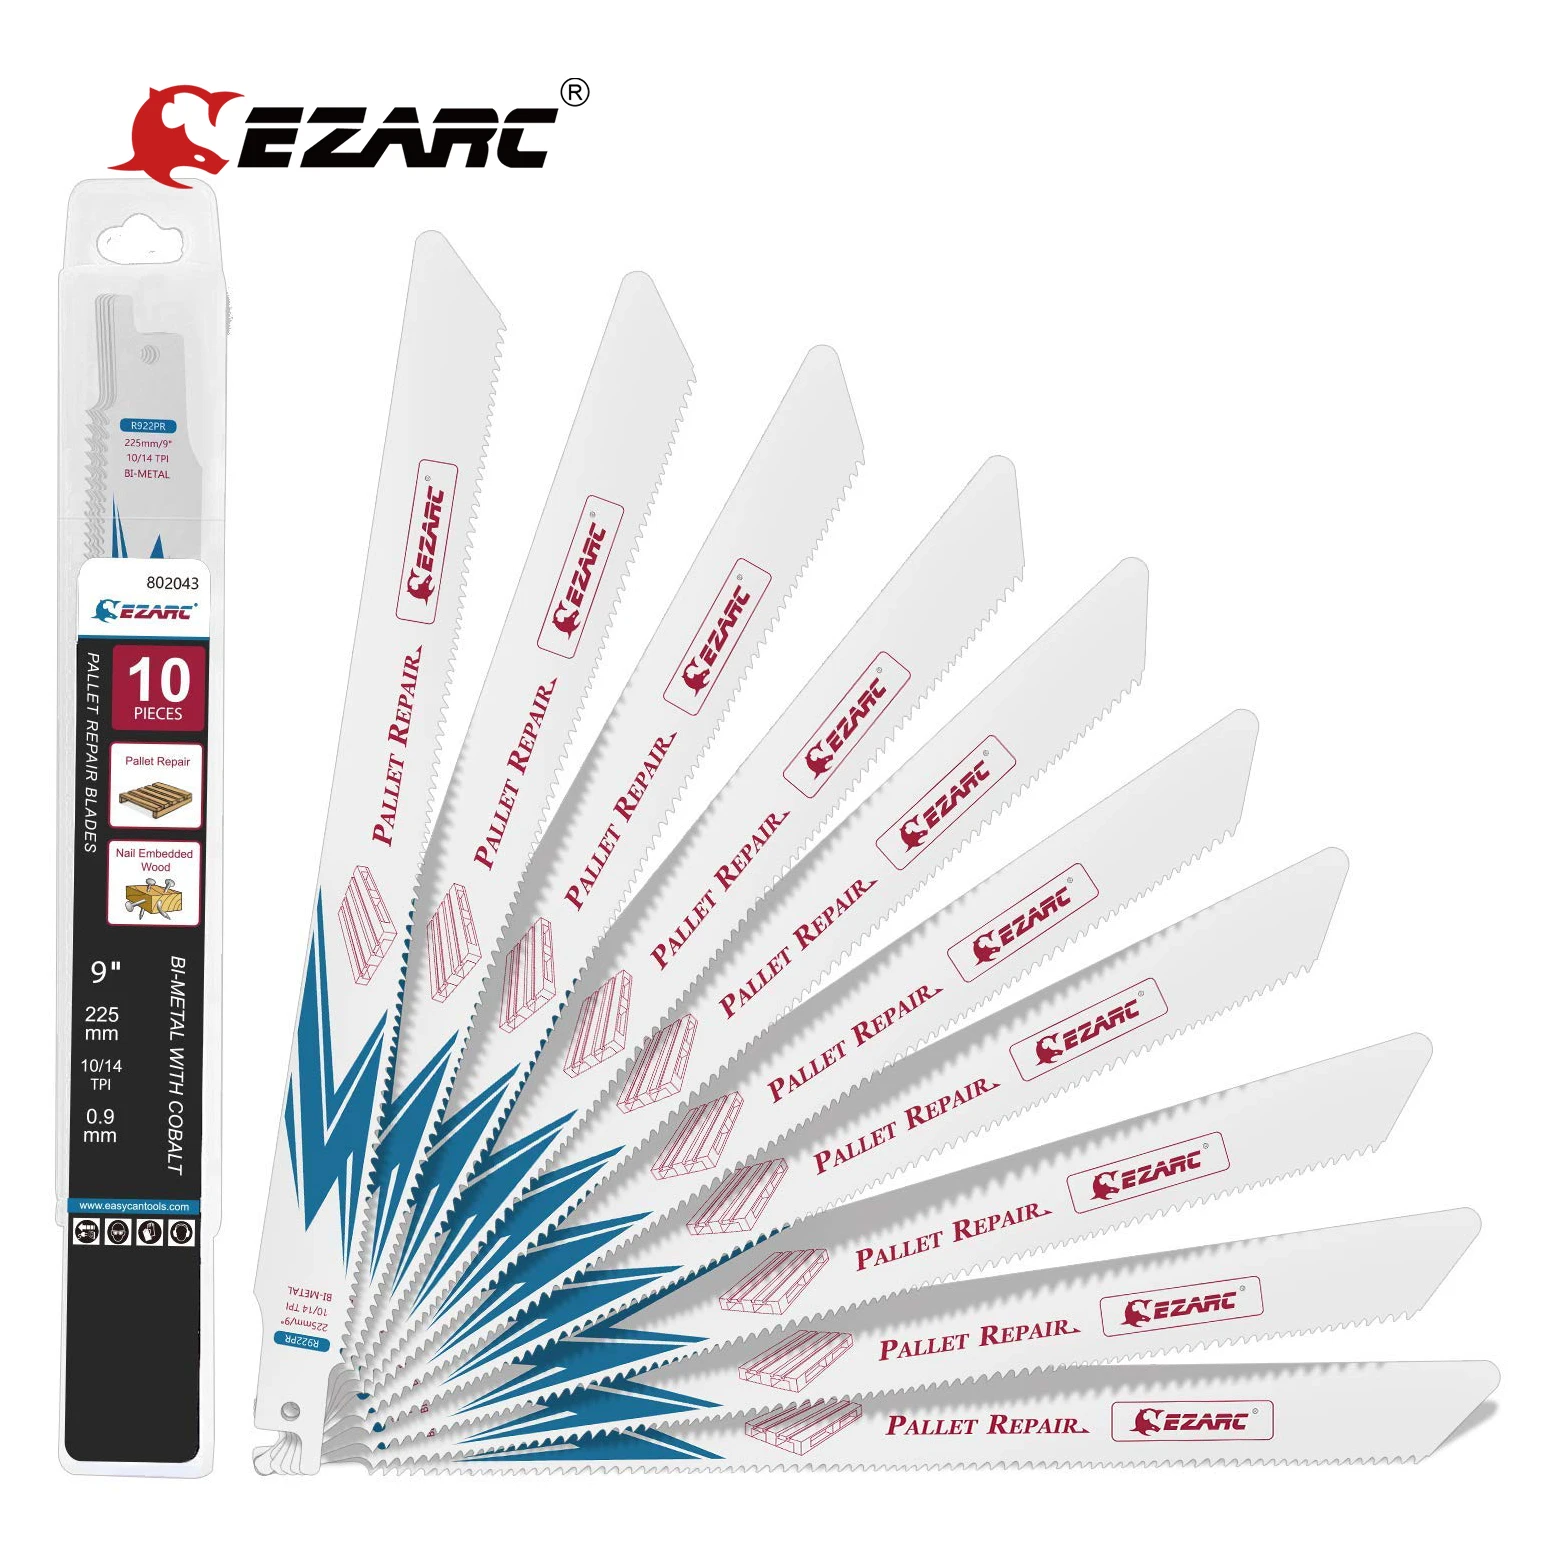 

EZARC 225cm 10pc Reciprocating Saw Blades Heavy Duty Bi-Metal with 8% Cobalt for Nail Embedded Wood and Pallet DismantlingR922PR